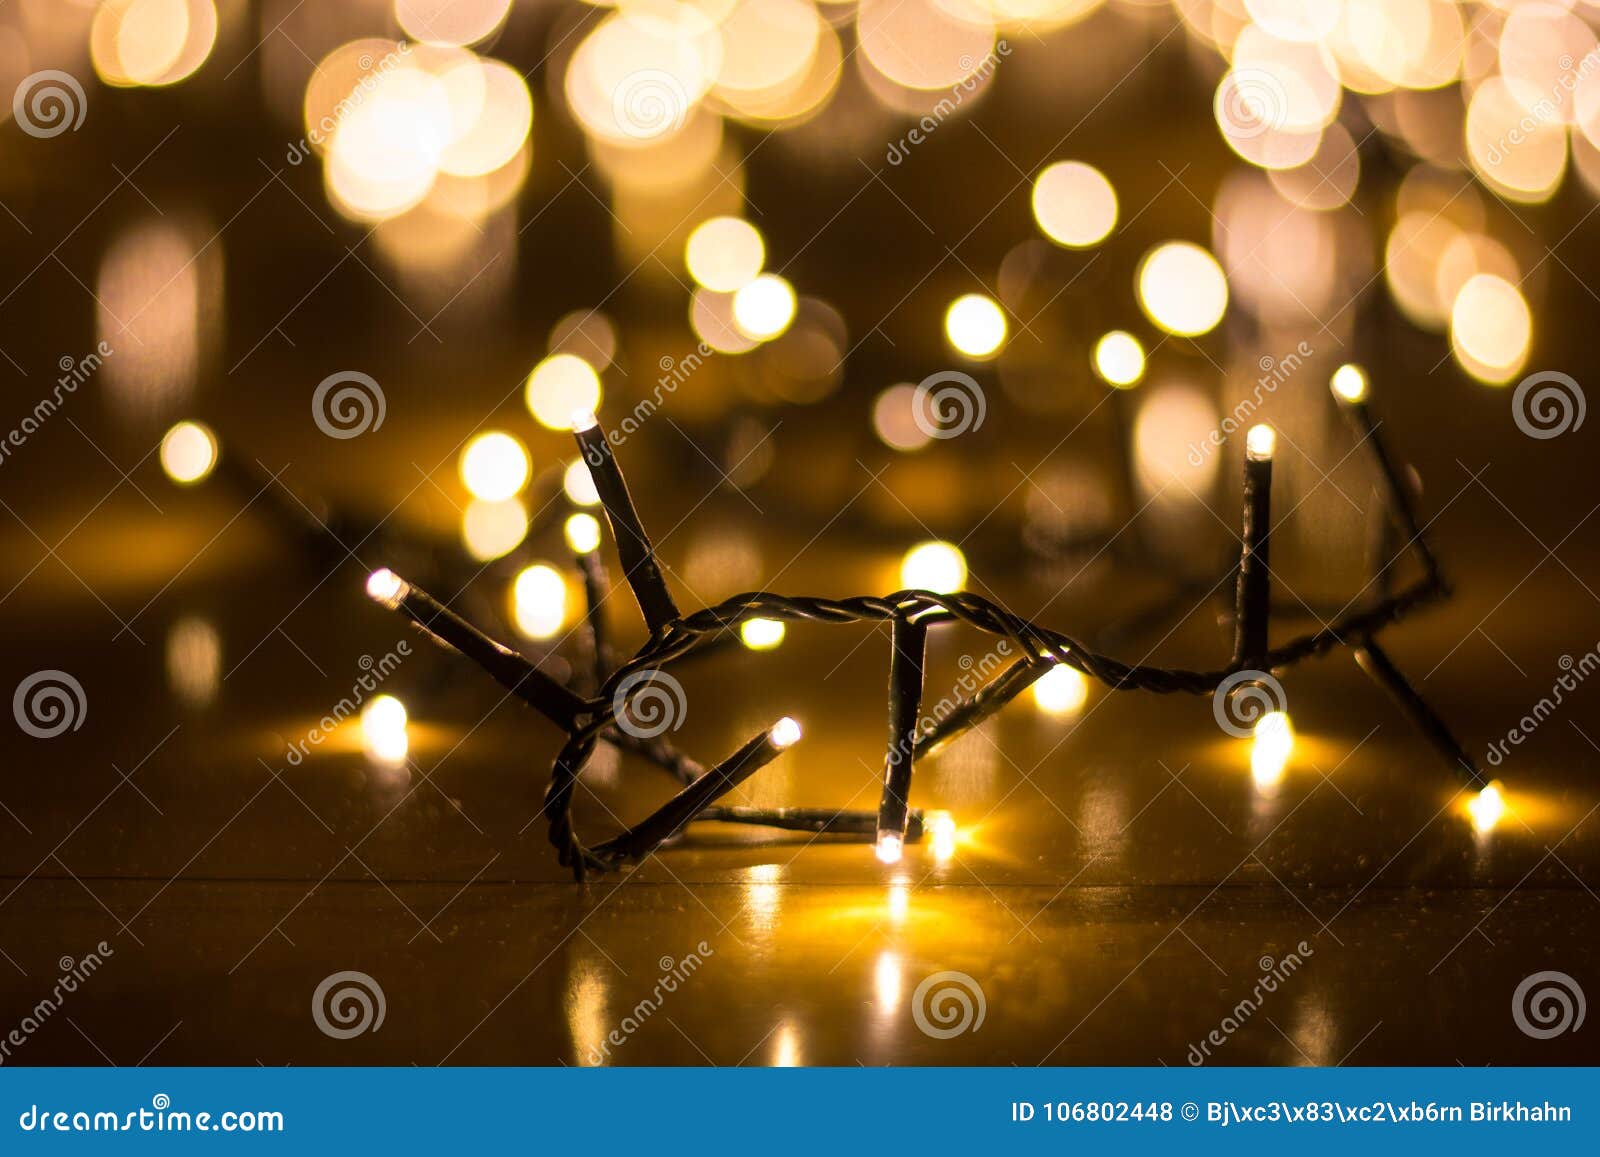 Fairy Lights for the Christmas Tree with Blurry Background Stock Photo ...